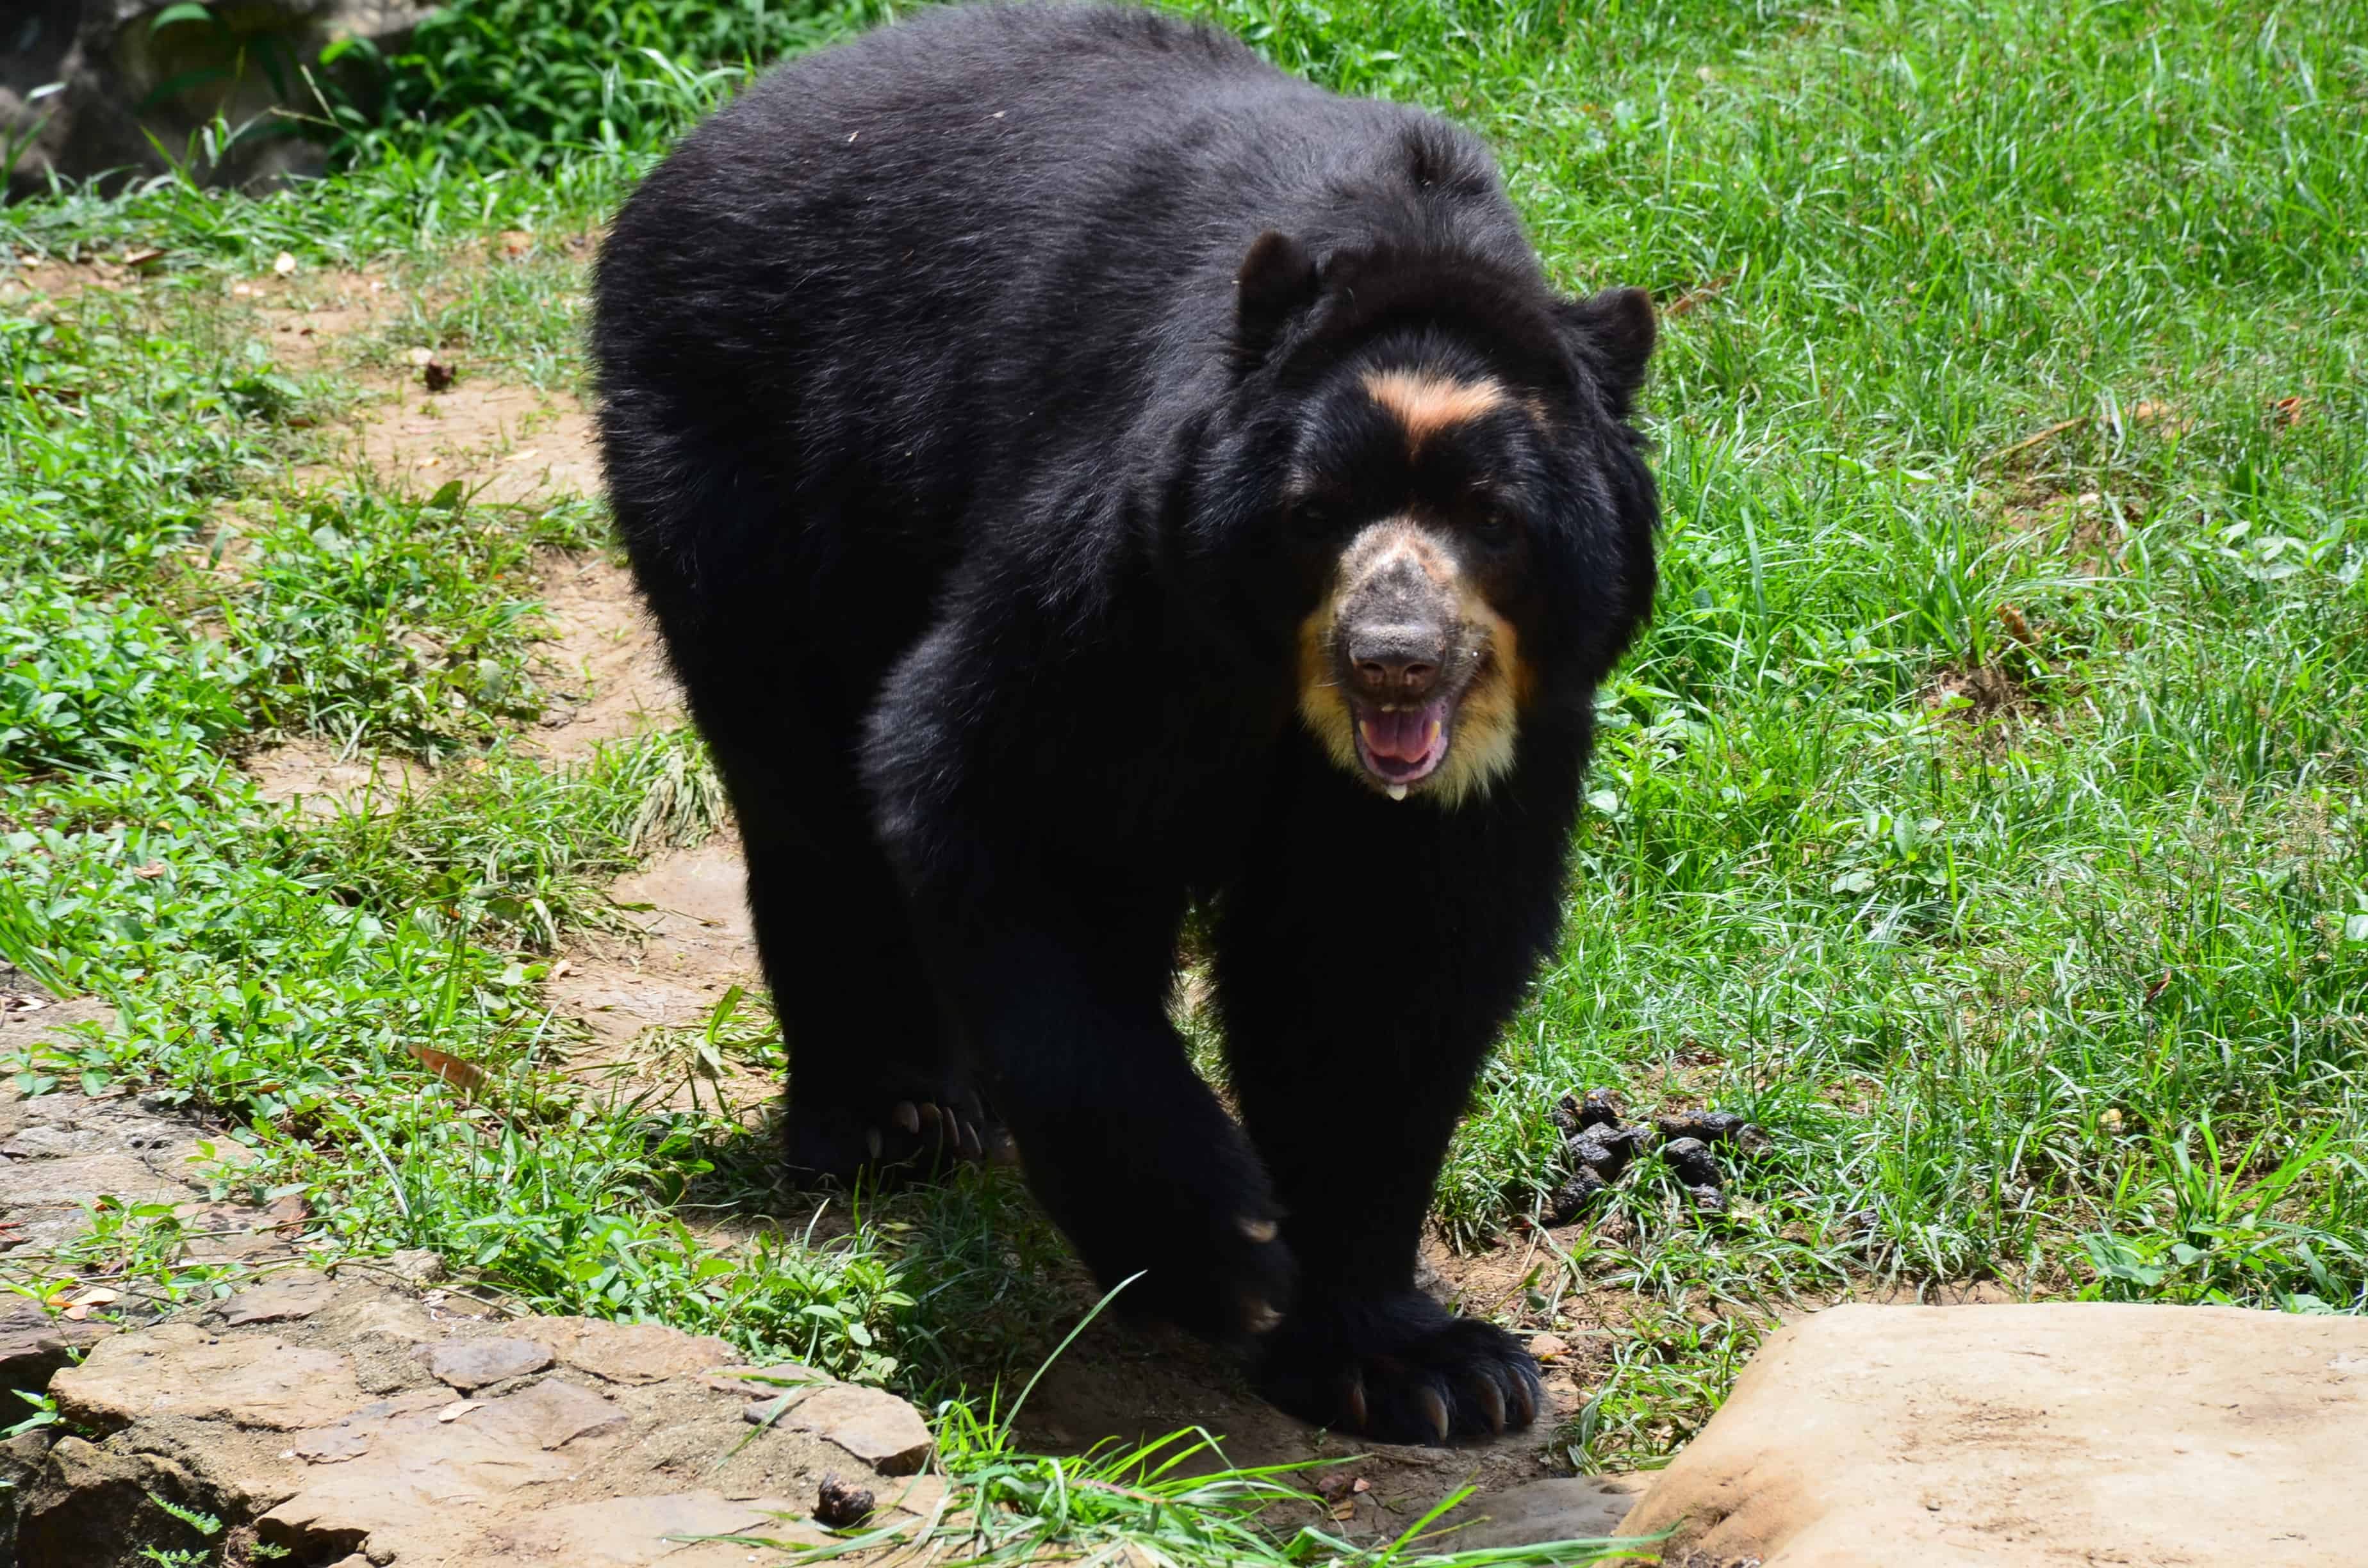 Bear at the Cali Zoo in Colombia